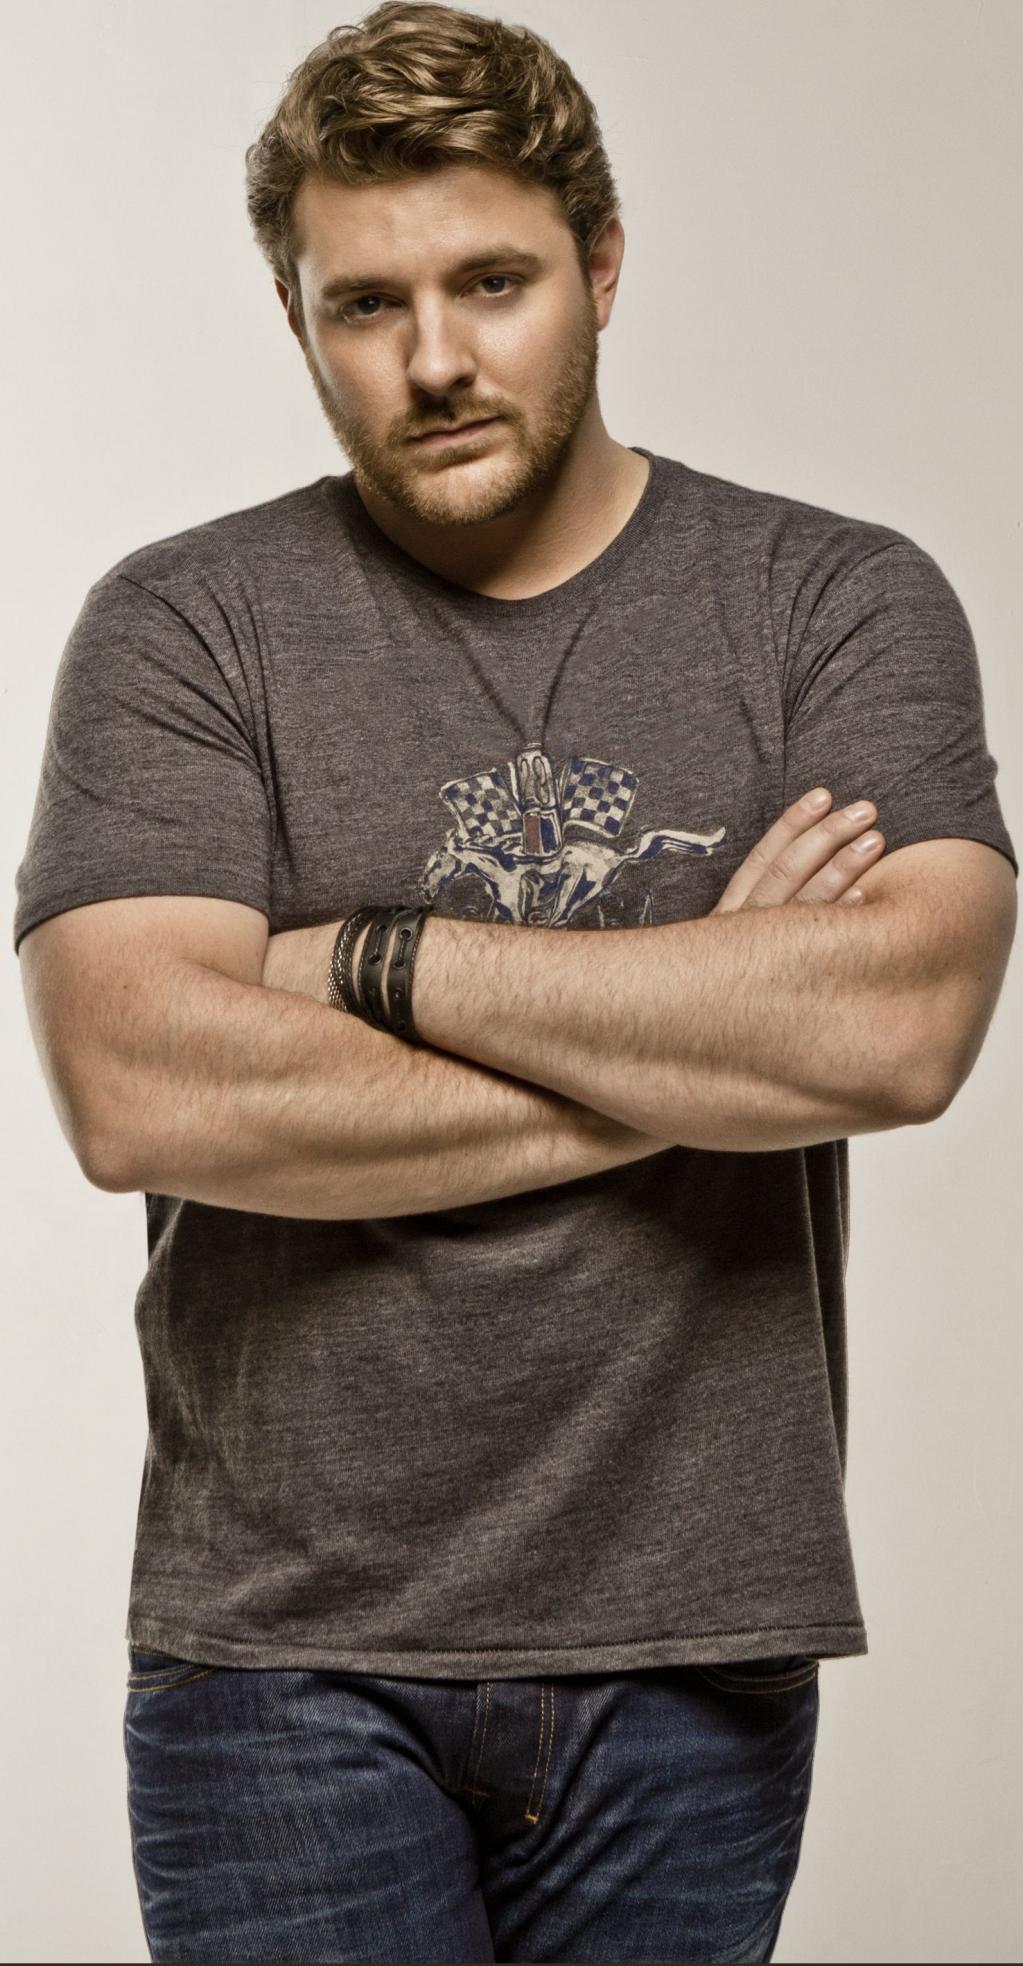 Interview With Country Singer Chris Young: 'Aw Naw' (Includes Interview)